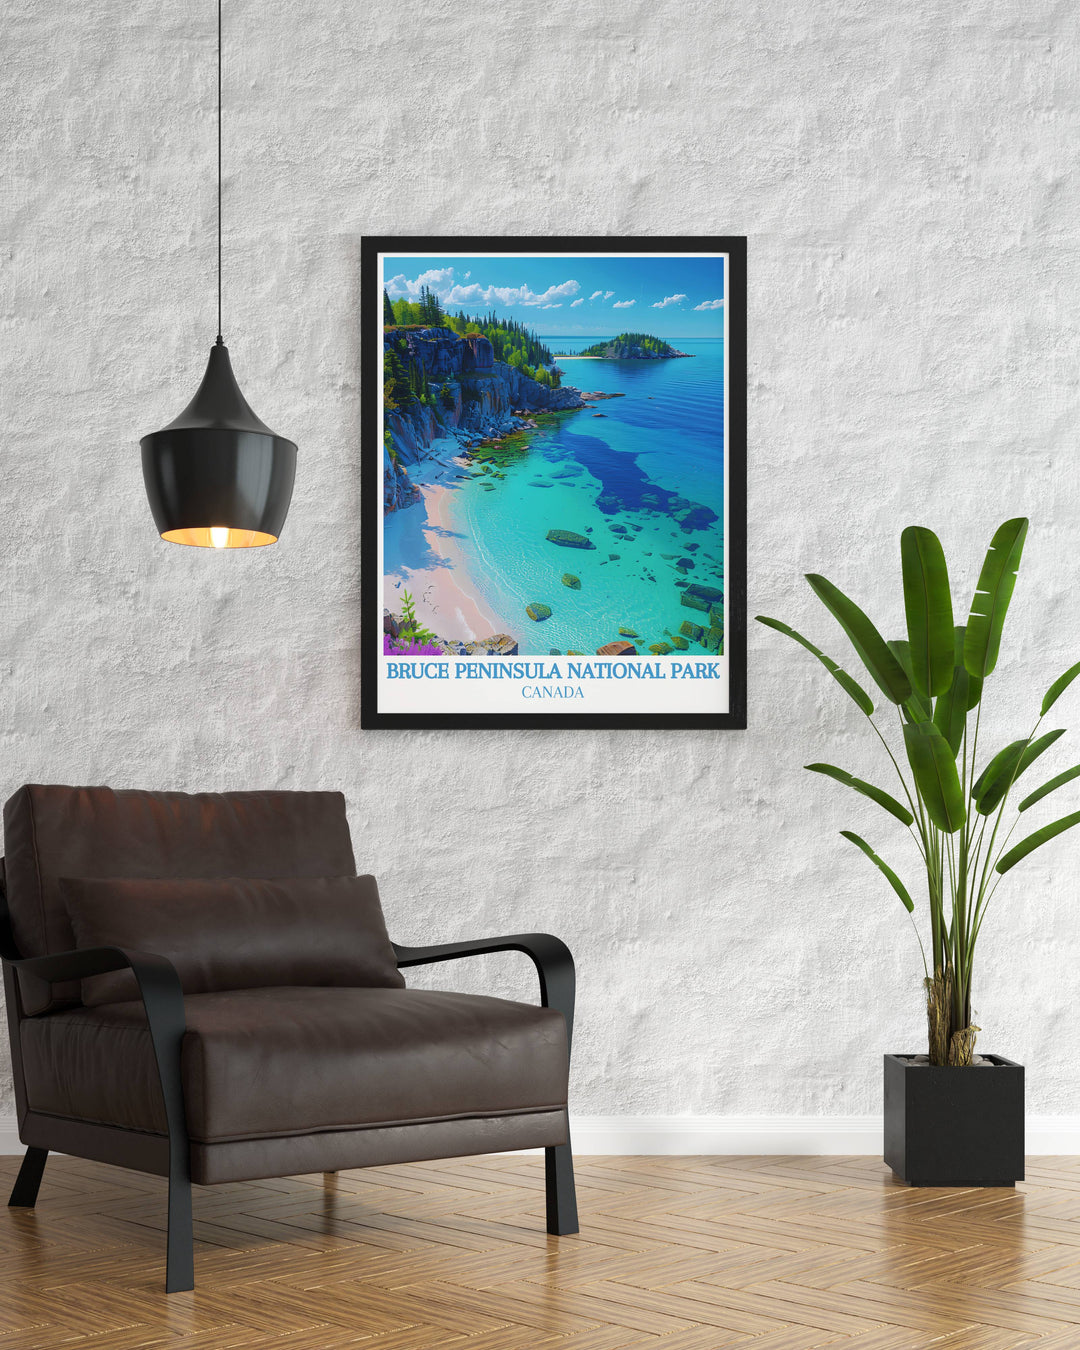 The Flowerpot Island Travel Prints are ideal gifts for travelers capturing the essence of this magical destination and providing a thoughtful and memorable present for friends and family who love nature and adventure